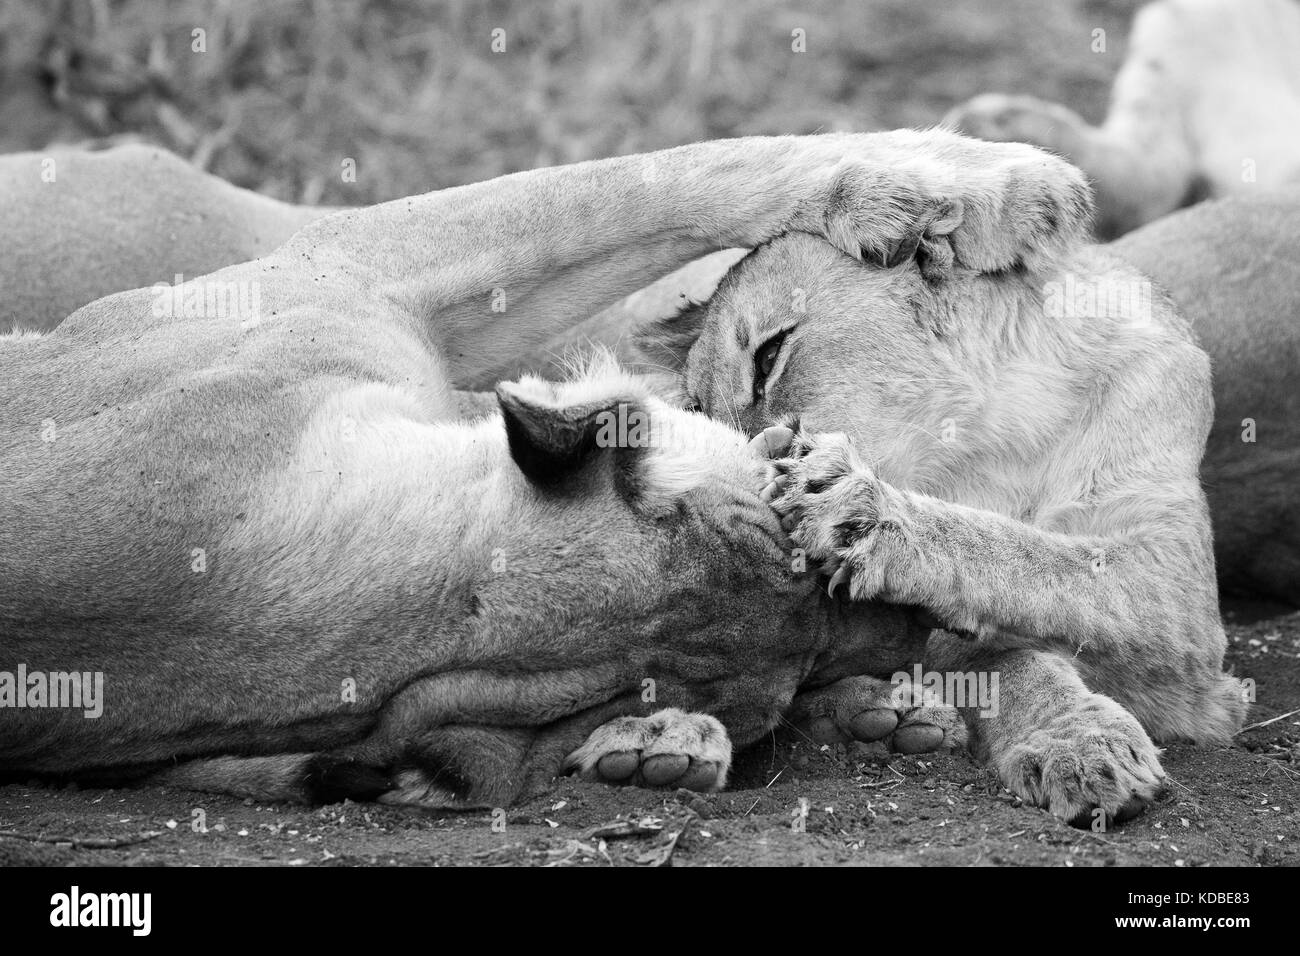 Lioness and her cub, Madikwe Game Reserve, South Africa, 2016 Stock Photo